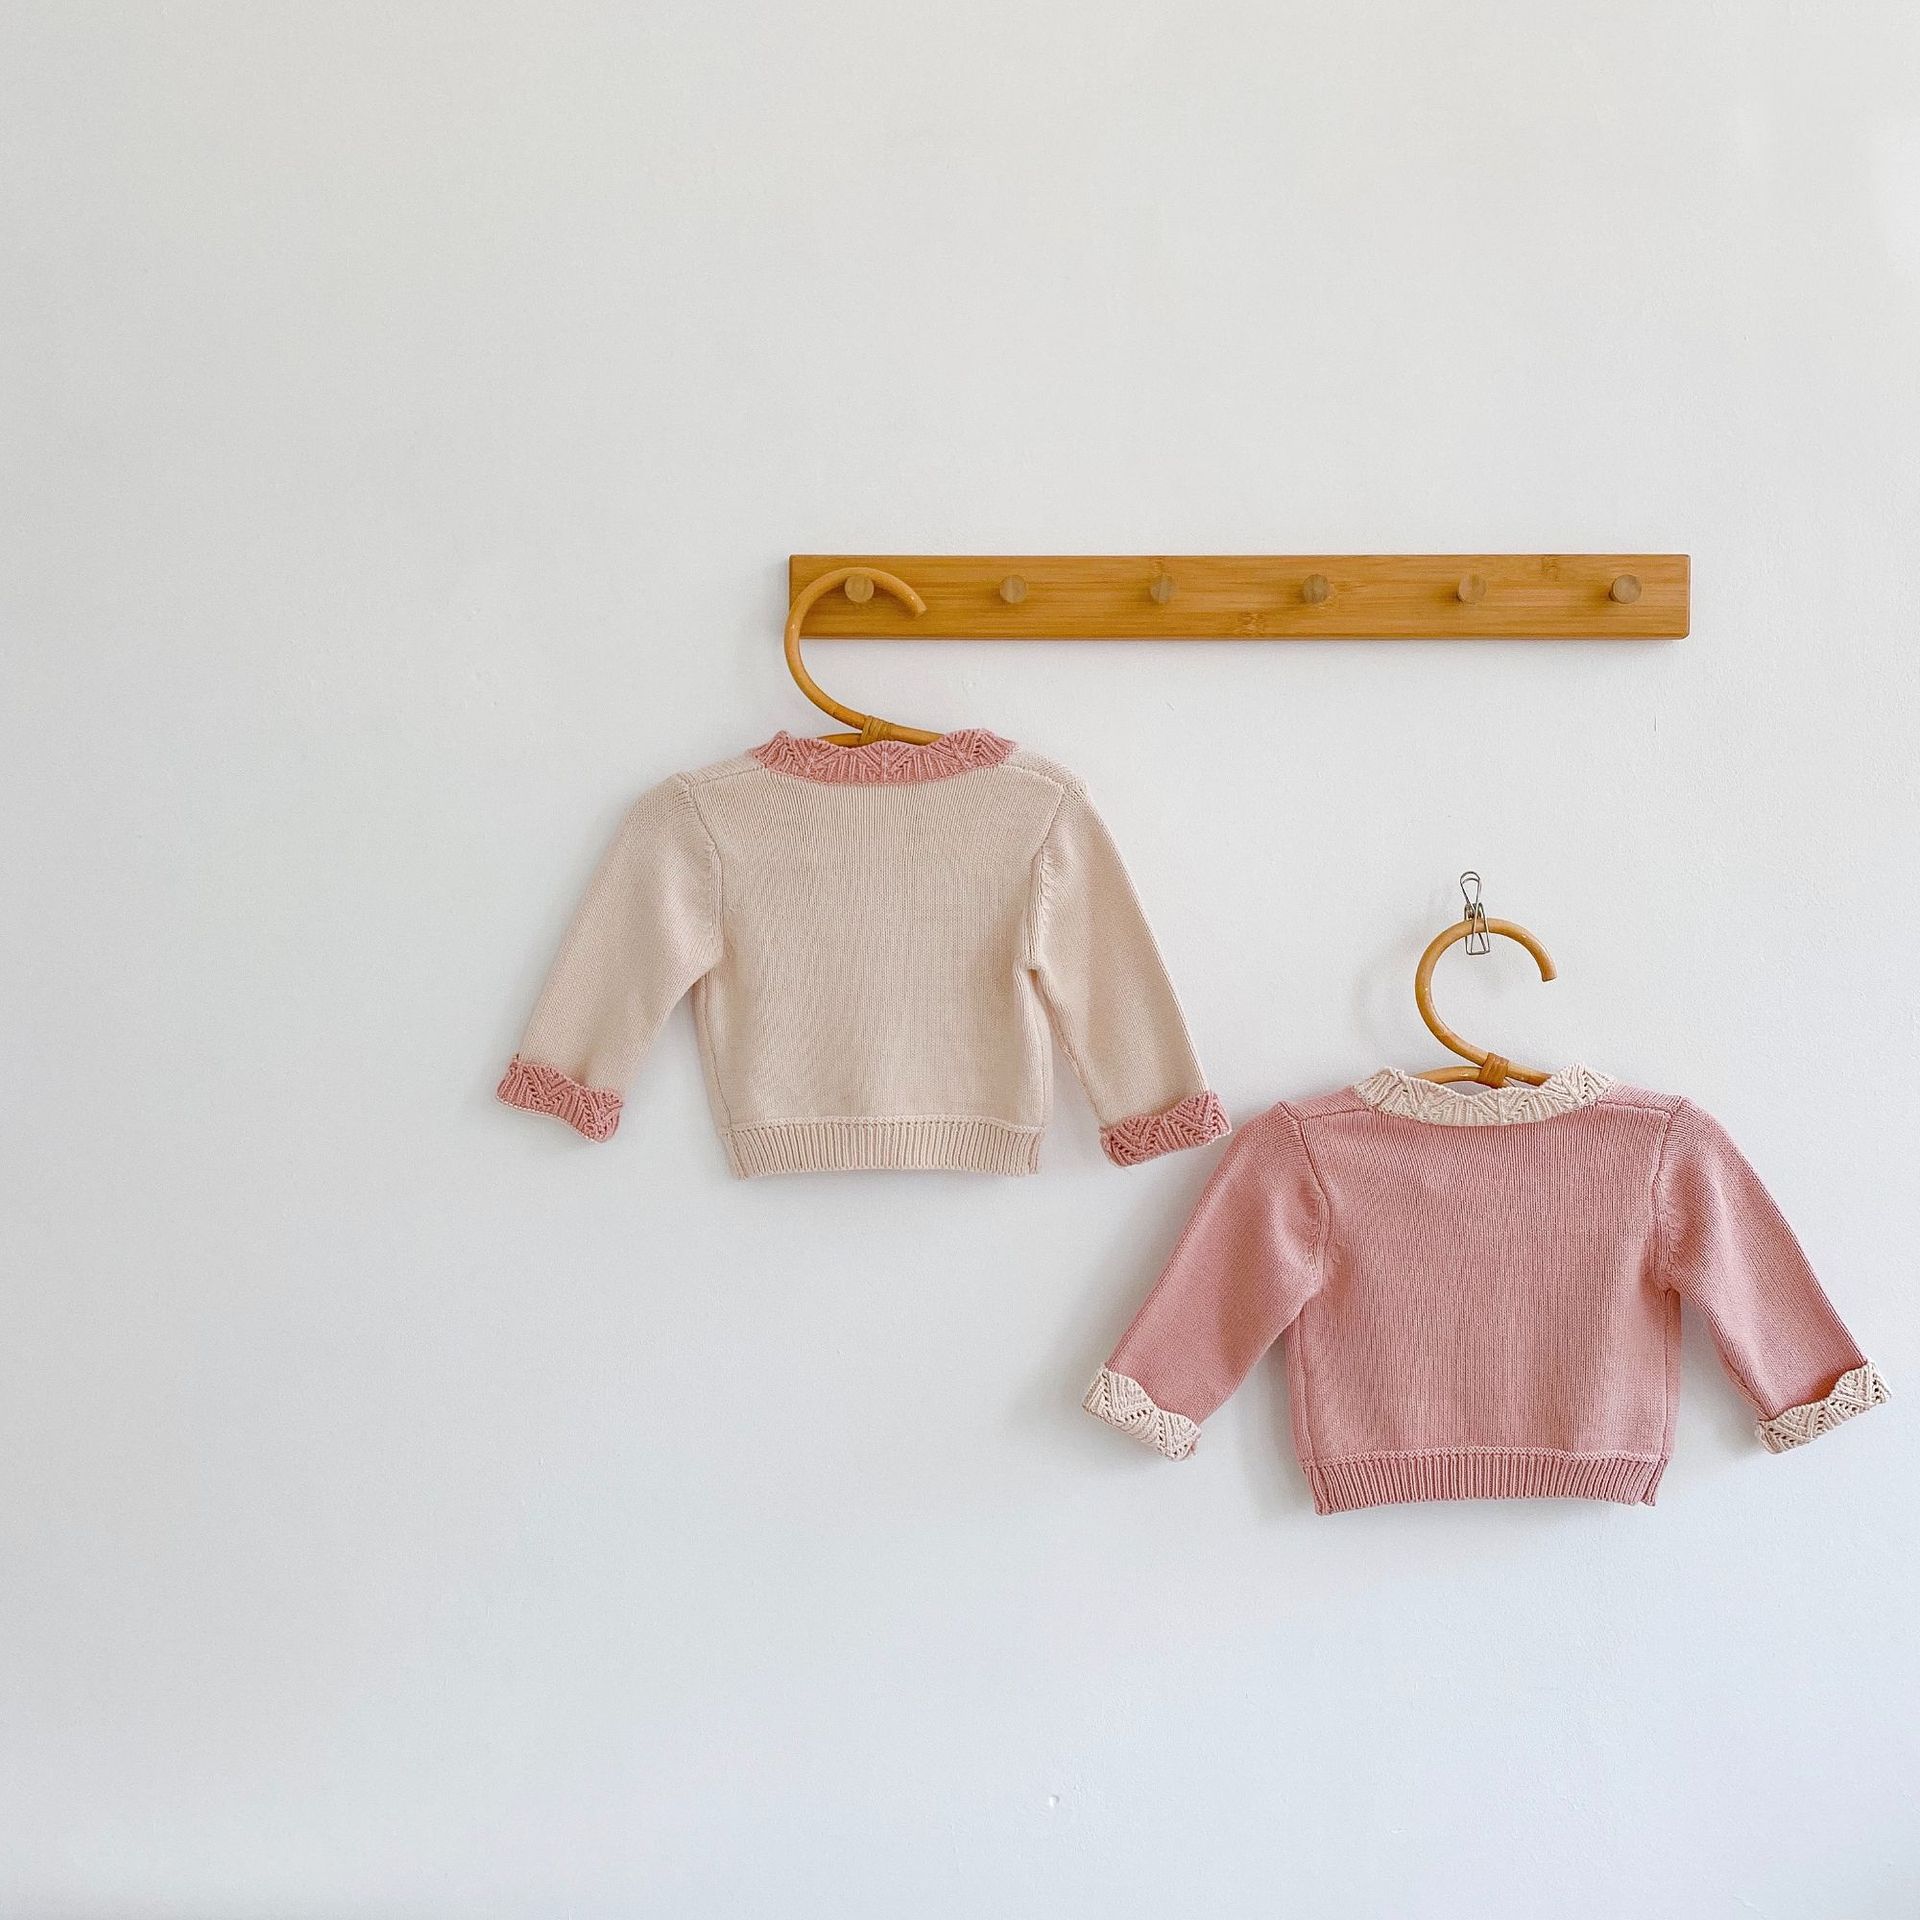 Baby Girl Knitted Coat Patterns